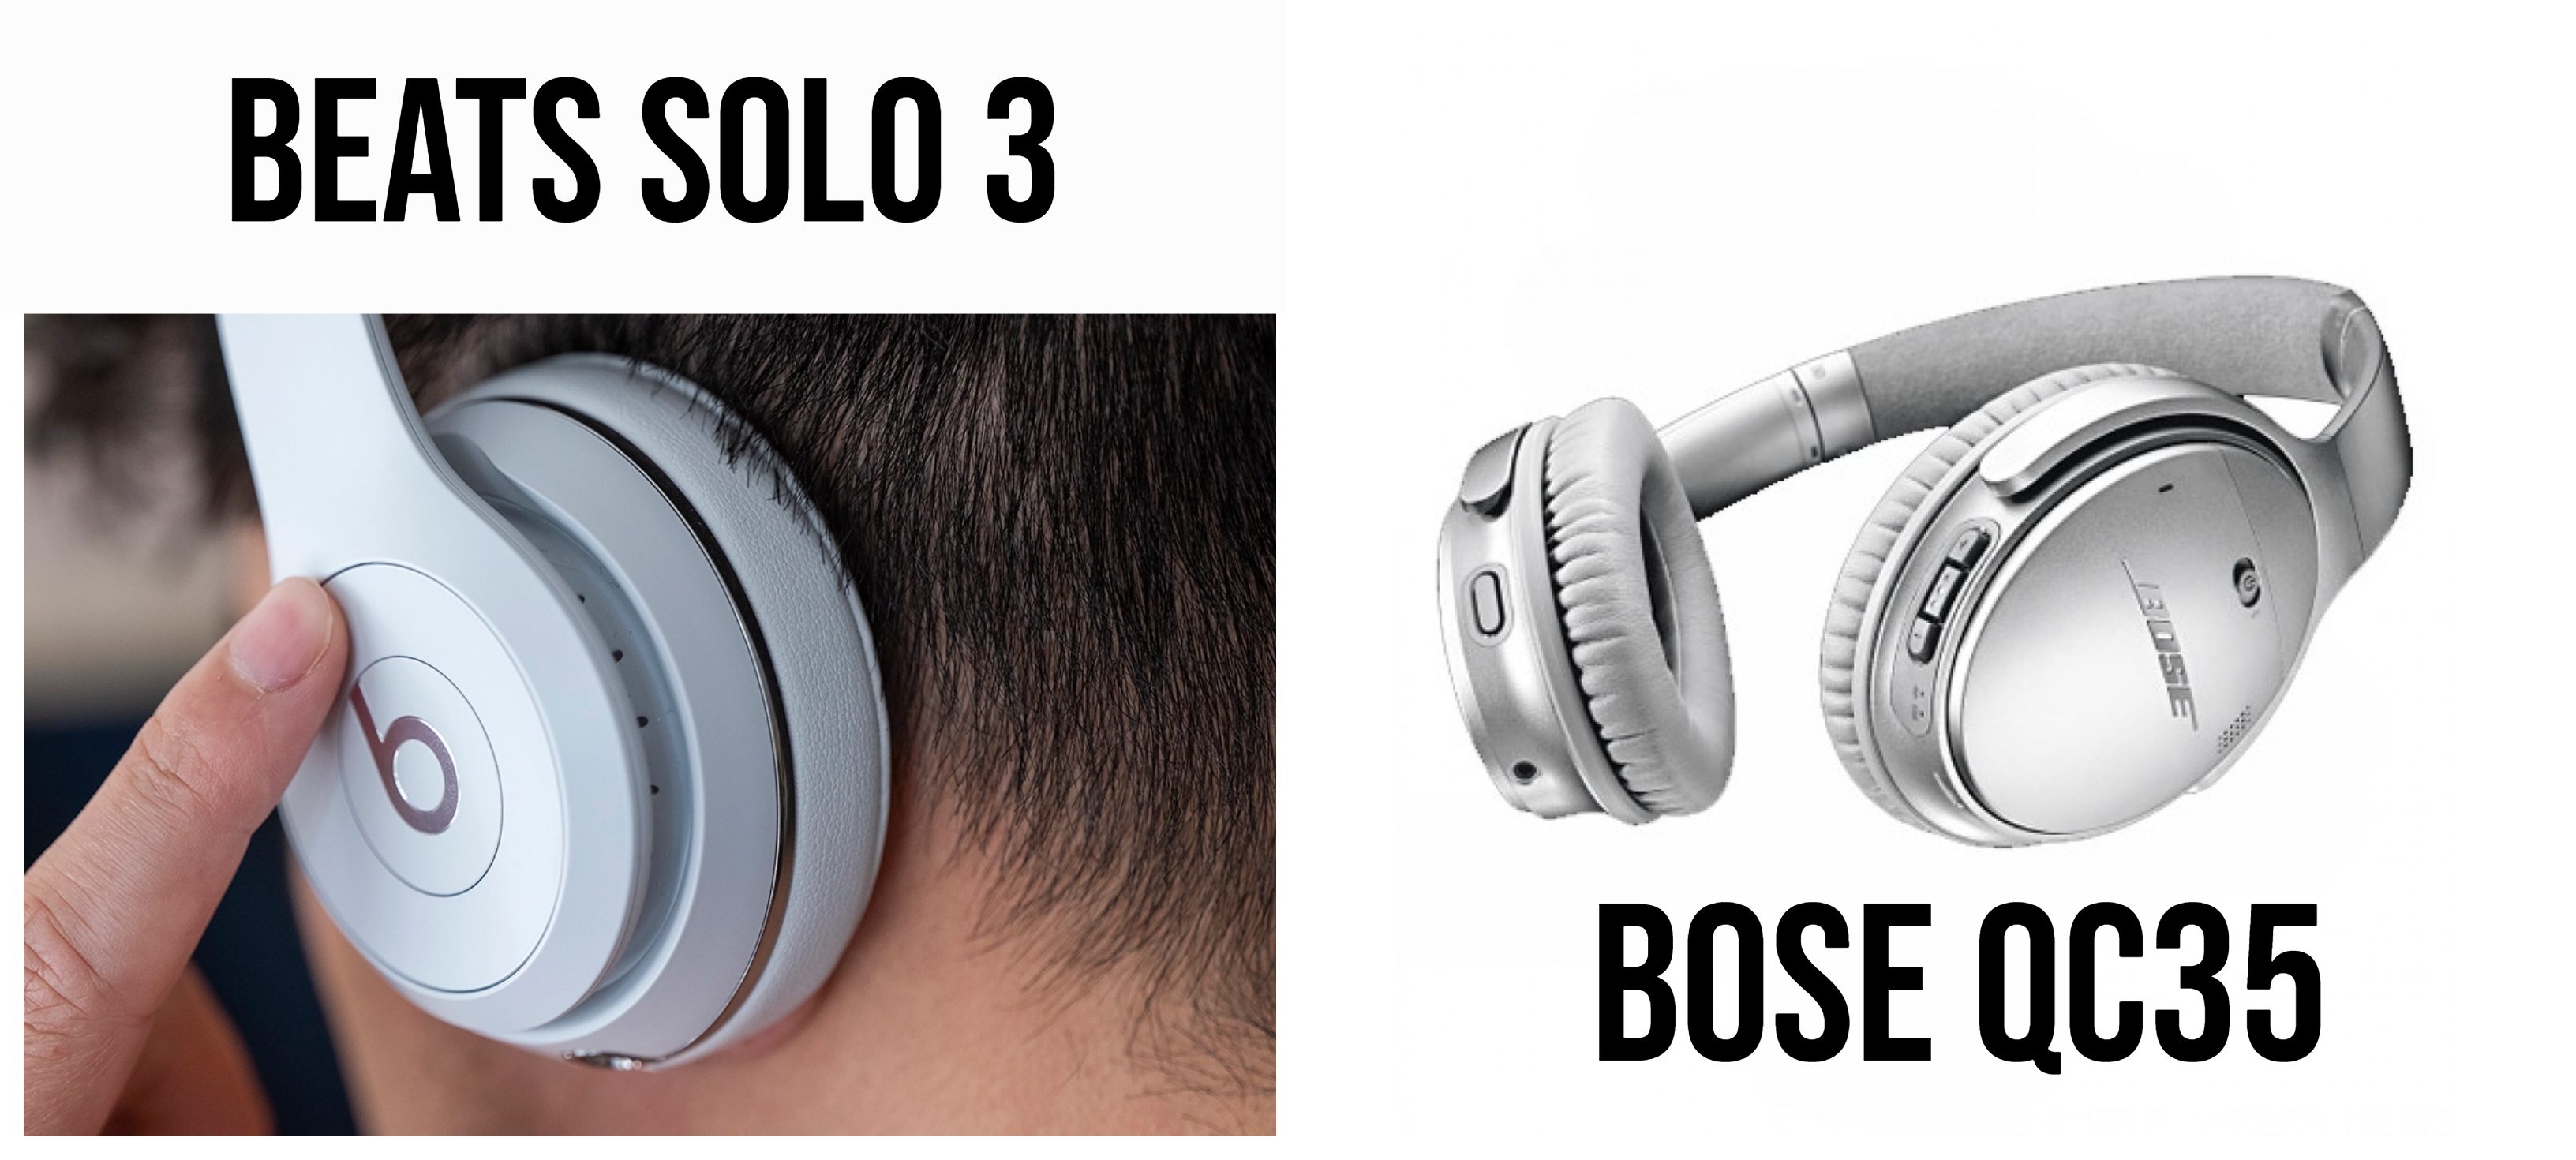 Beats Solo 3 and Bose QC35 collage